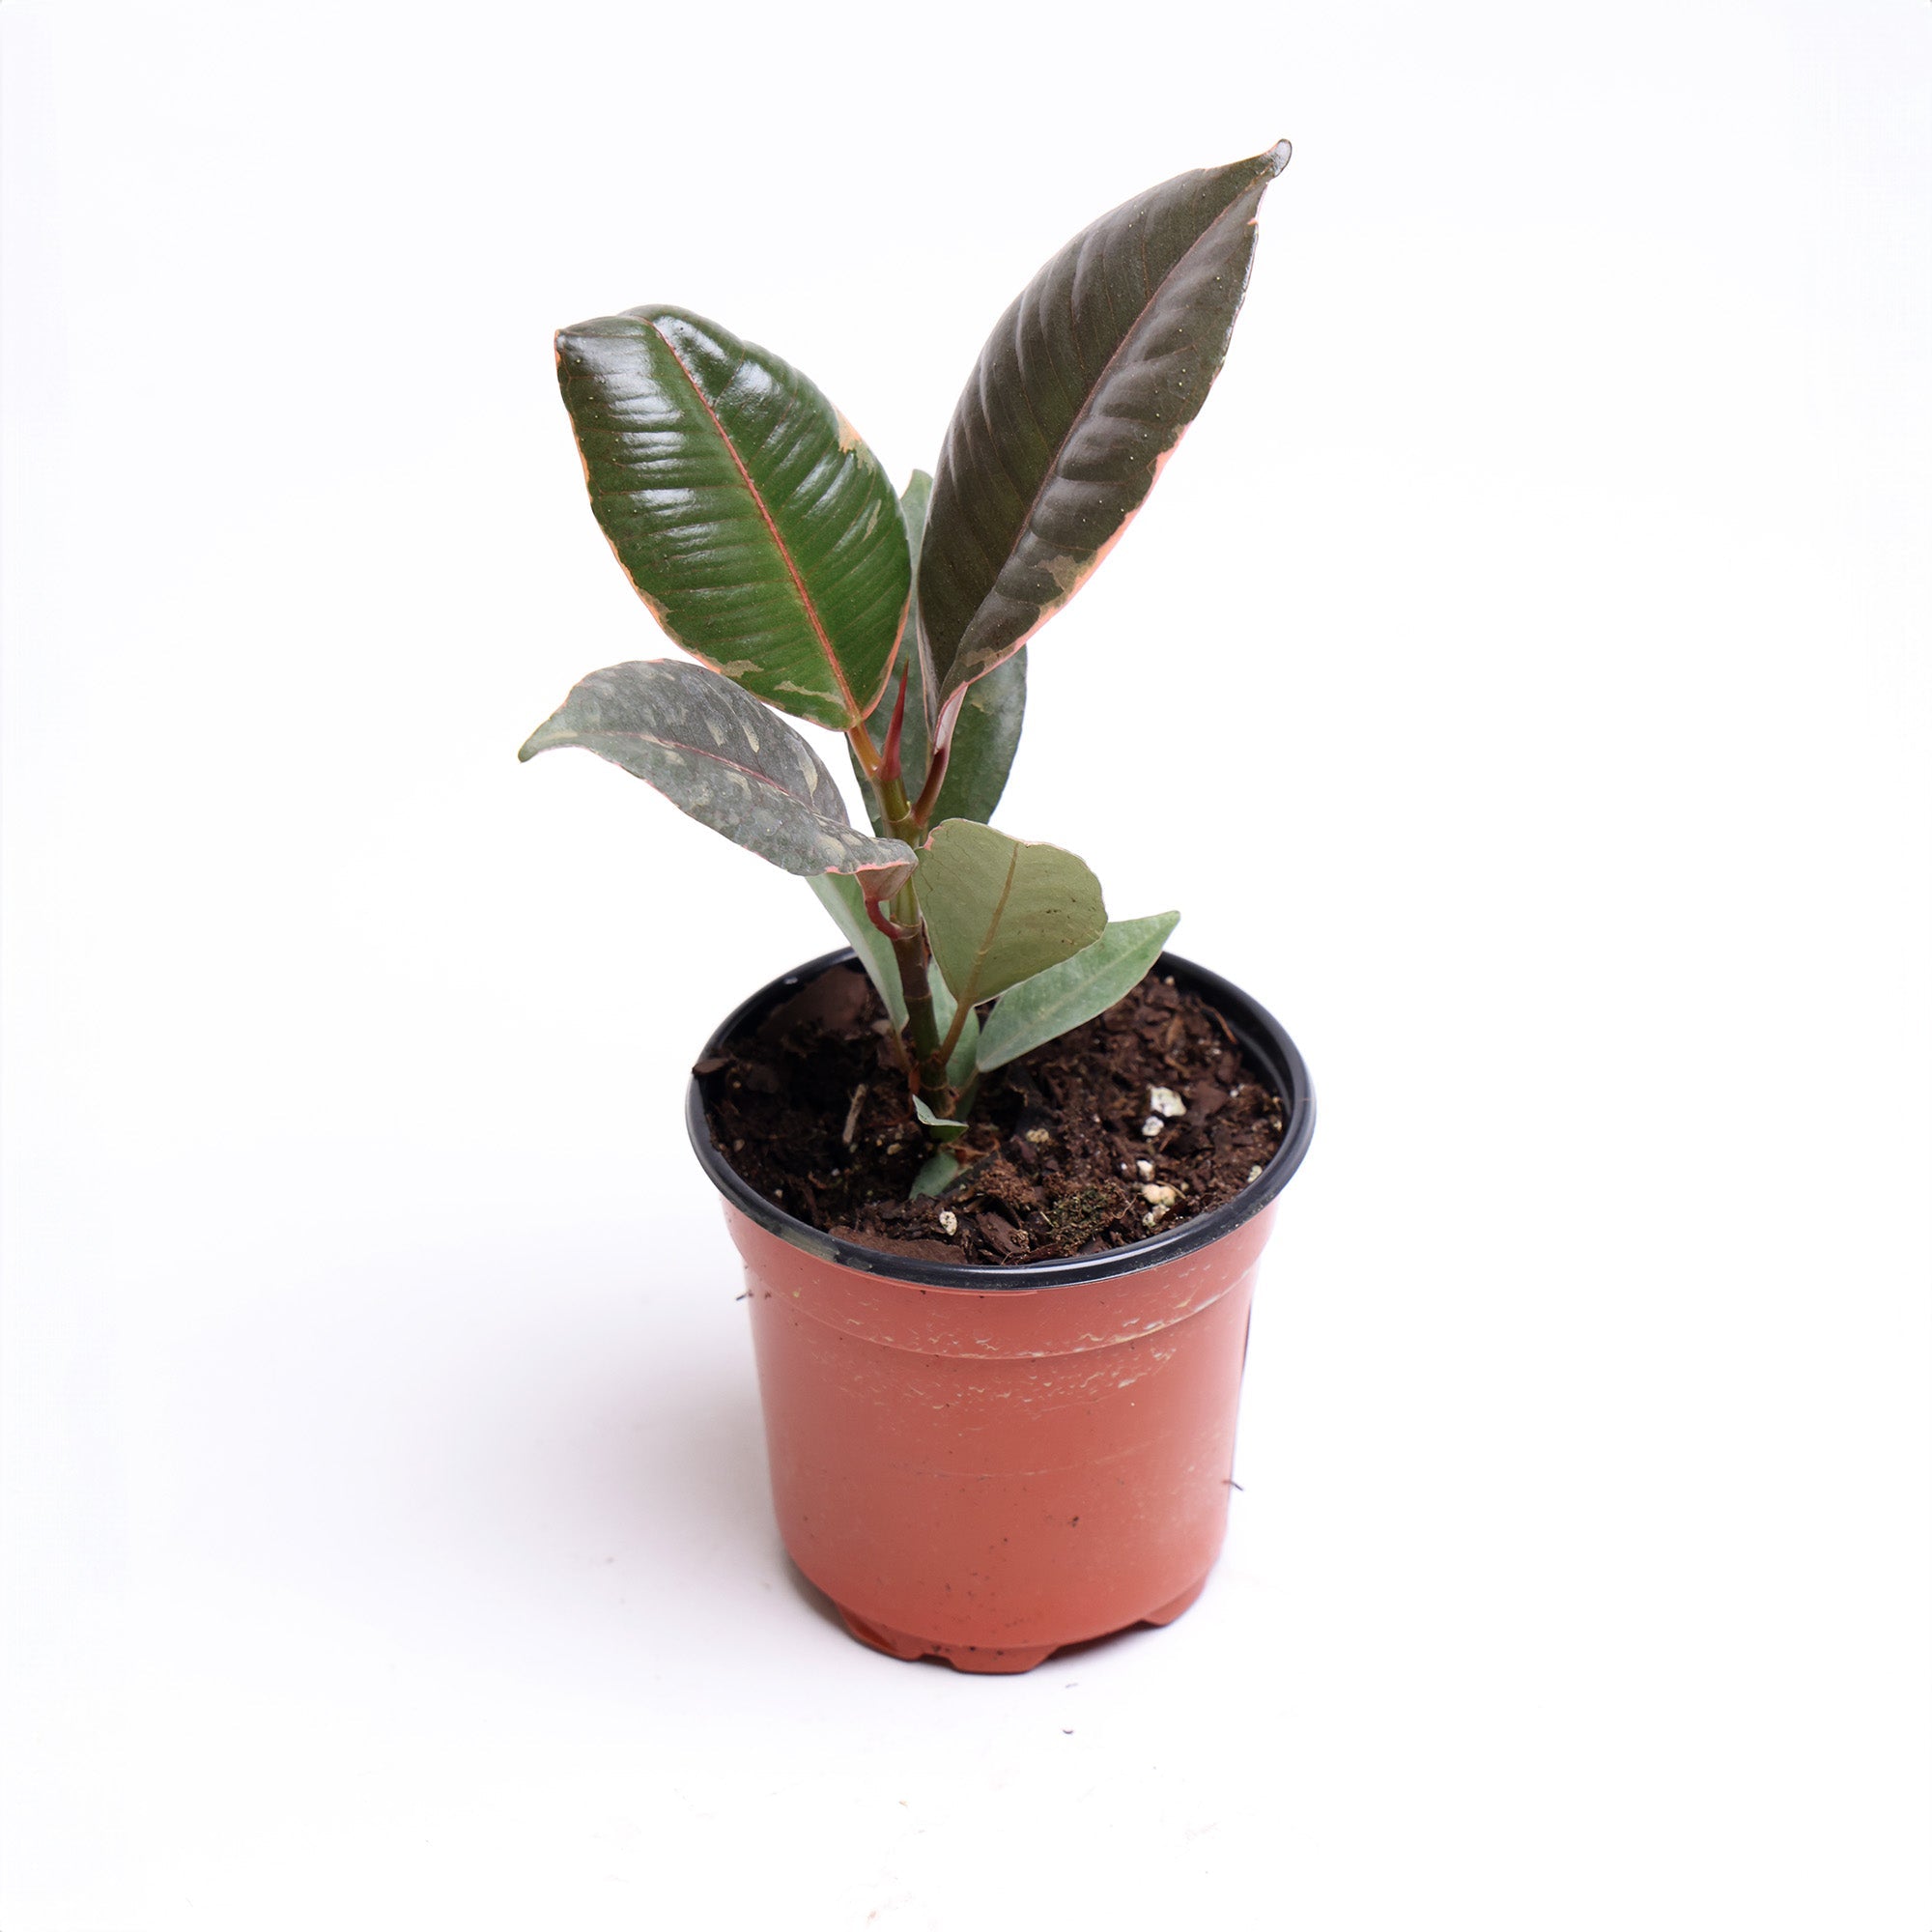 A Ficus Ruby 4 Inch plant with glossy green leaves in a small grower pot, isolated on a white background by Chive Studio.